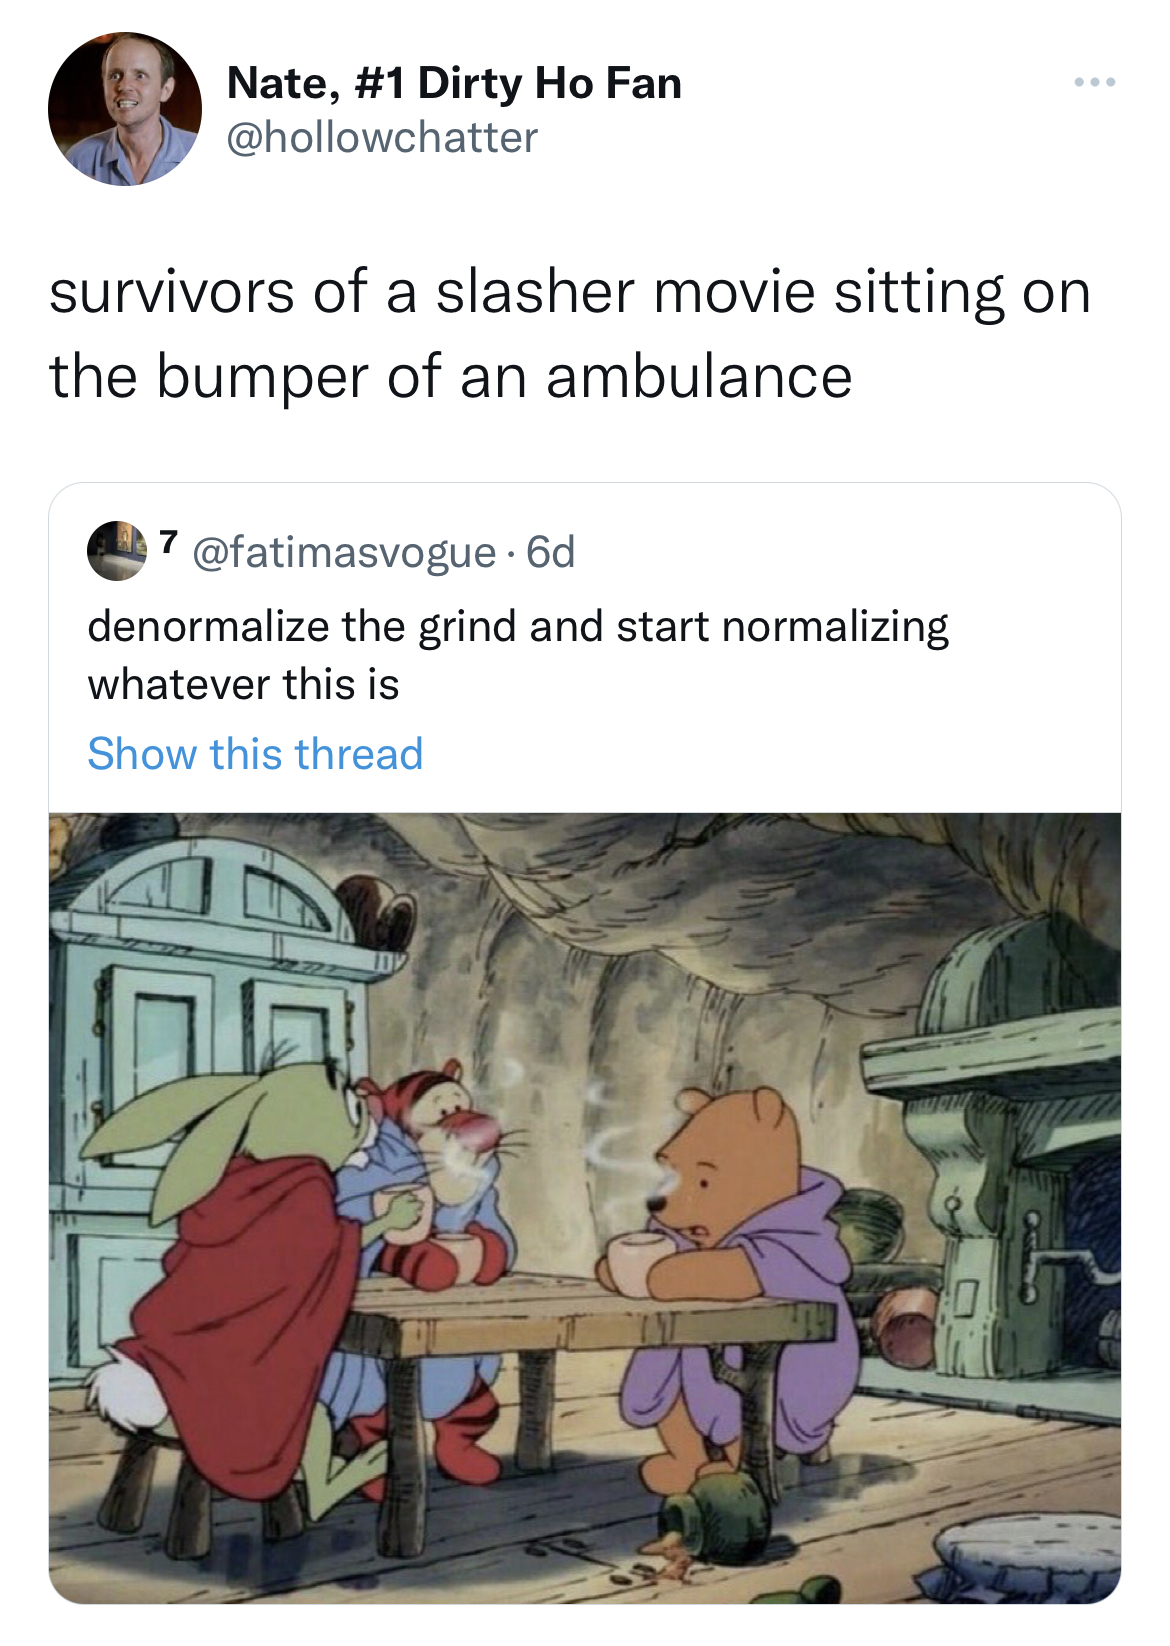 Savage and funny tweets - cartoon - Nate, Dirty Ho Fan survivors of a slasher movie sitting on the bumper of an ambulance denormalize the grind and start normalizing whatever this is Show this thread